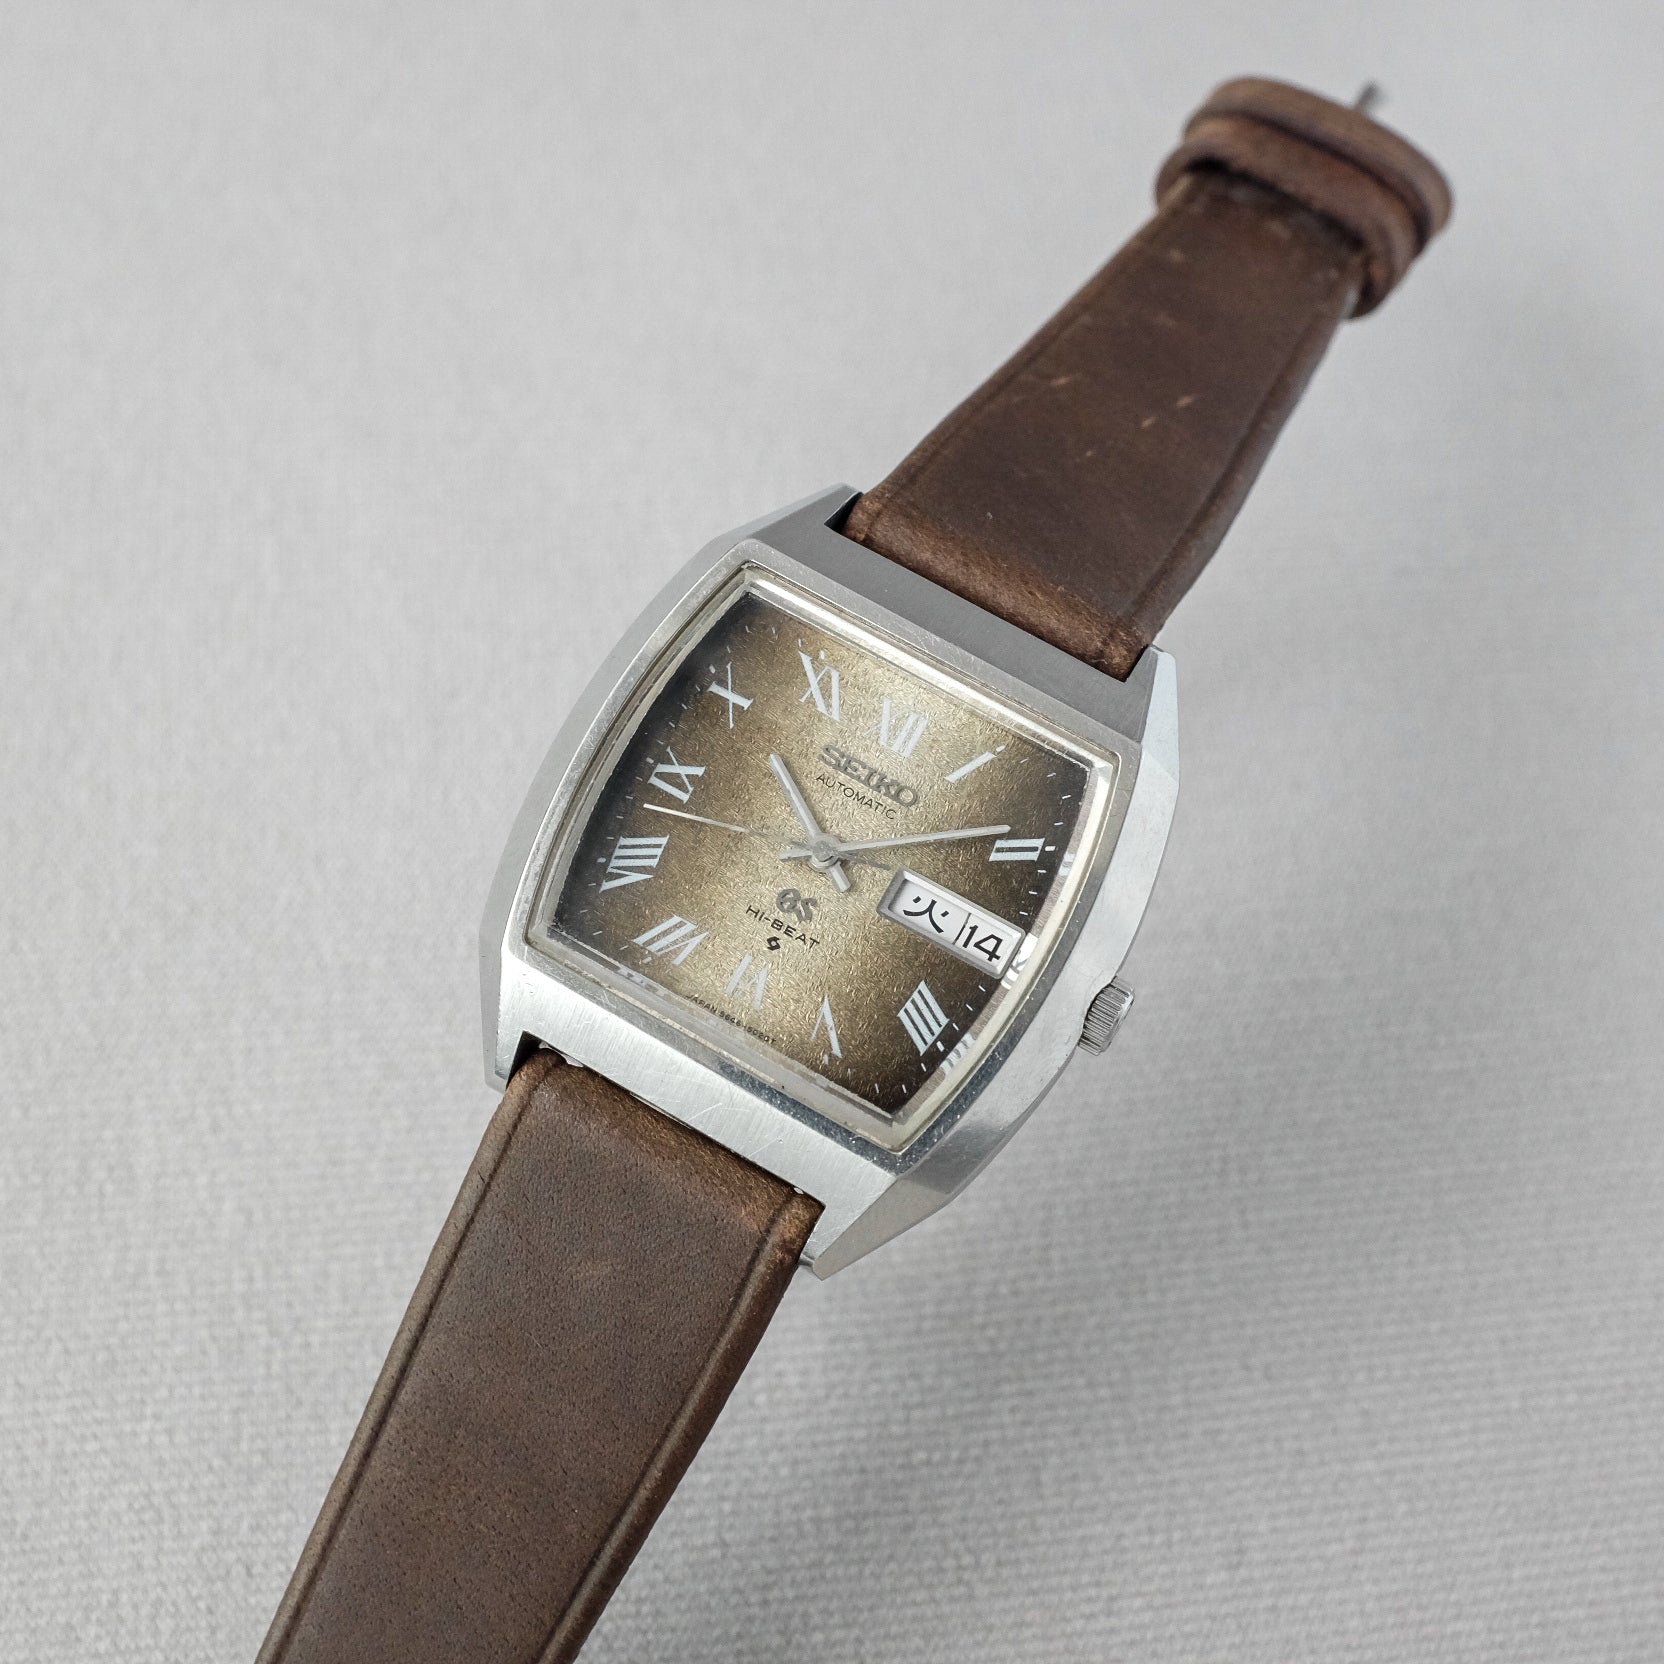 Grand Seiko 5646-5010 from 1972